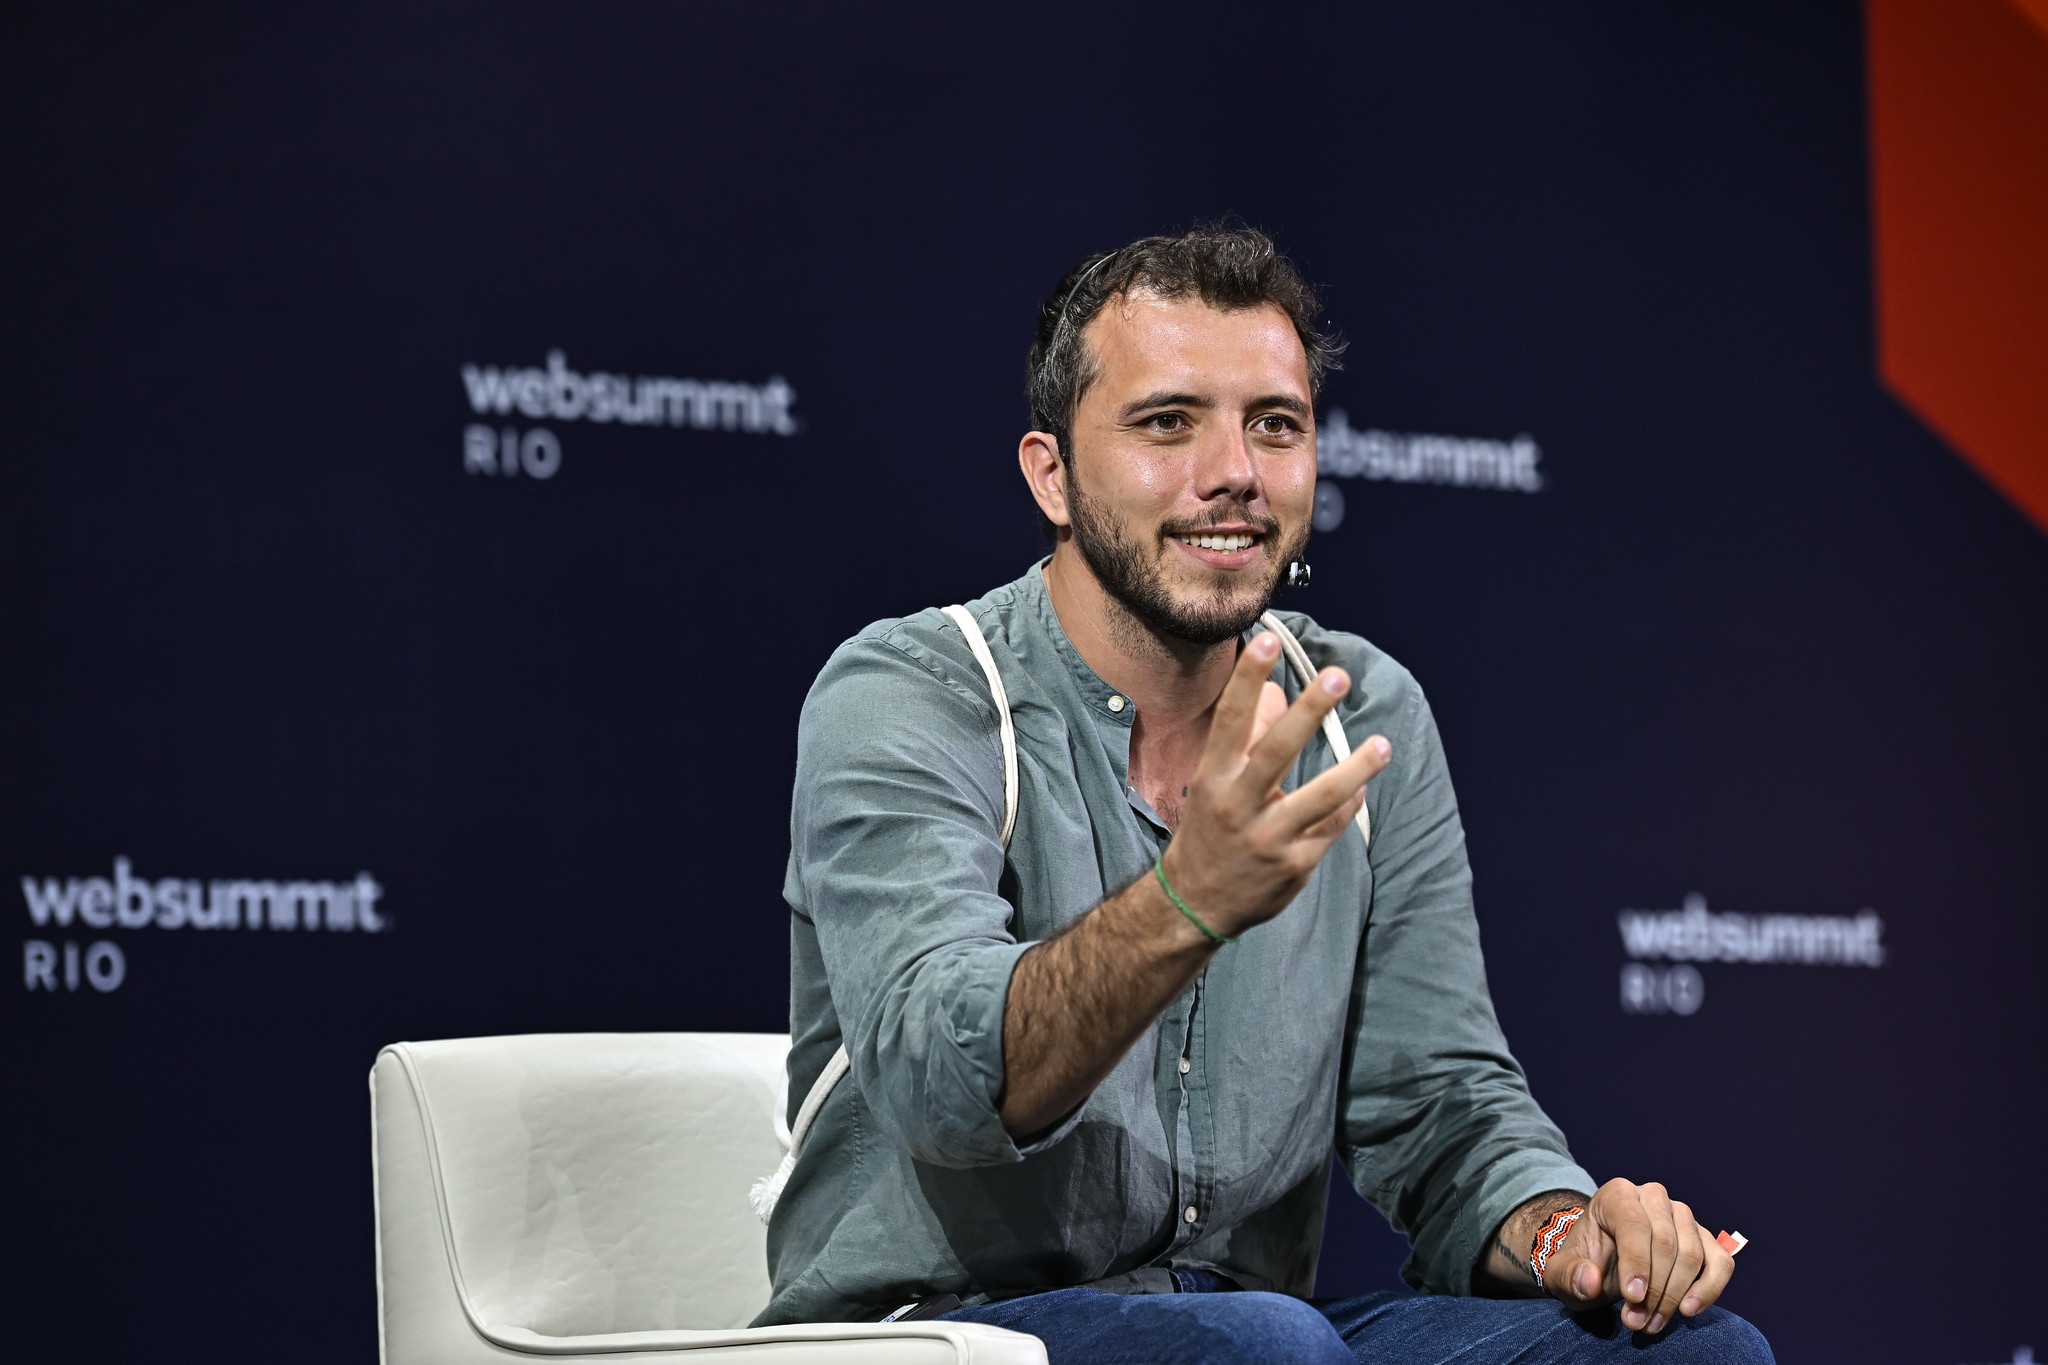 A person (Movimento Bem Viver co-founder Thiago Ávila) sits in an armchair. Their left arm rests on their knee. They gesture with their right hand, reaching towards the audience, which is out of shot. They are wearing a headset mic.